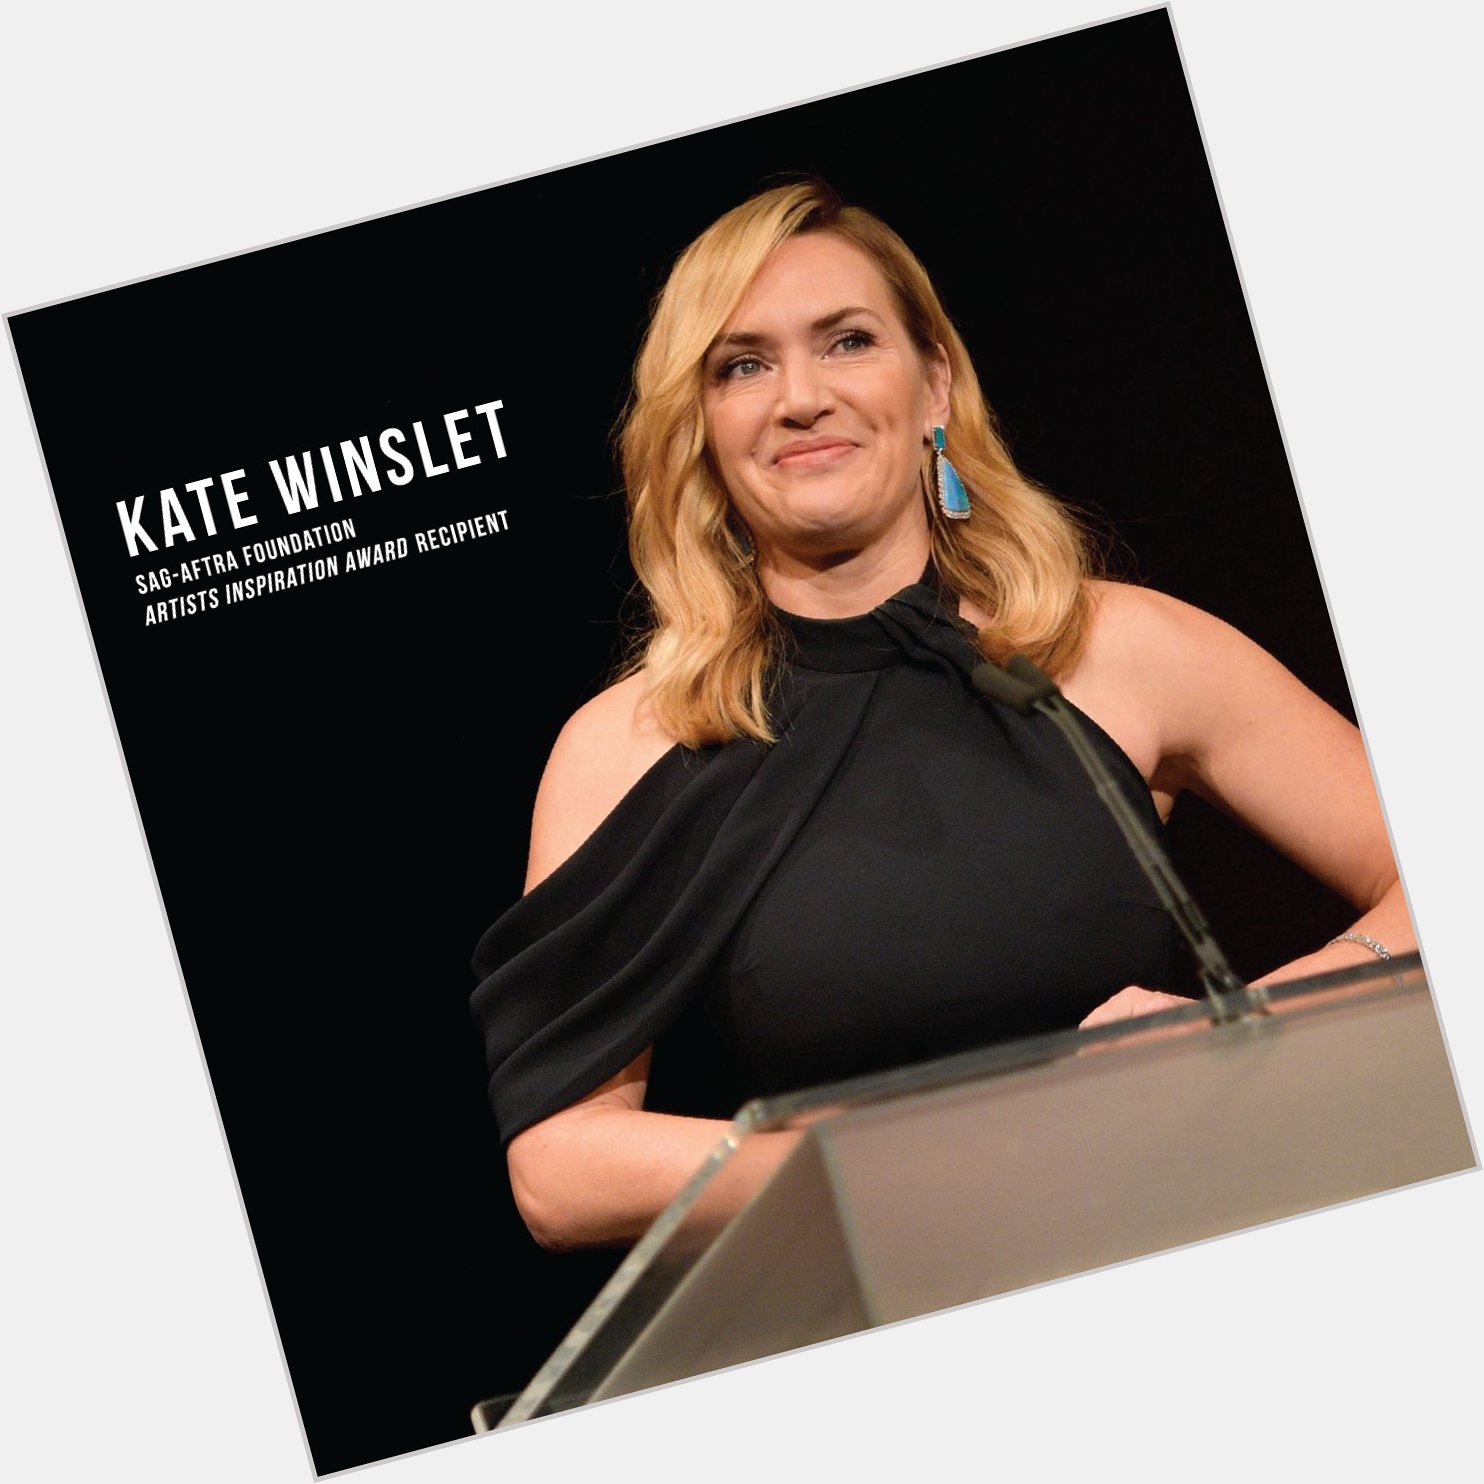 Happy Birthday to our 2017 Artists Inspiration Award recipient Kate Winslet! 